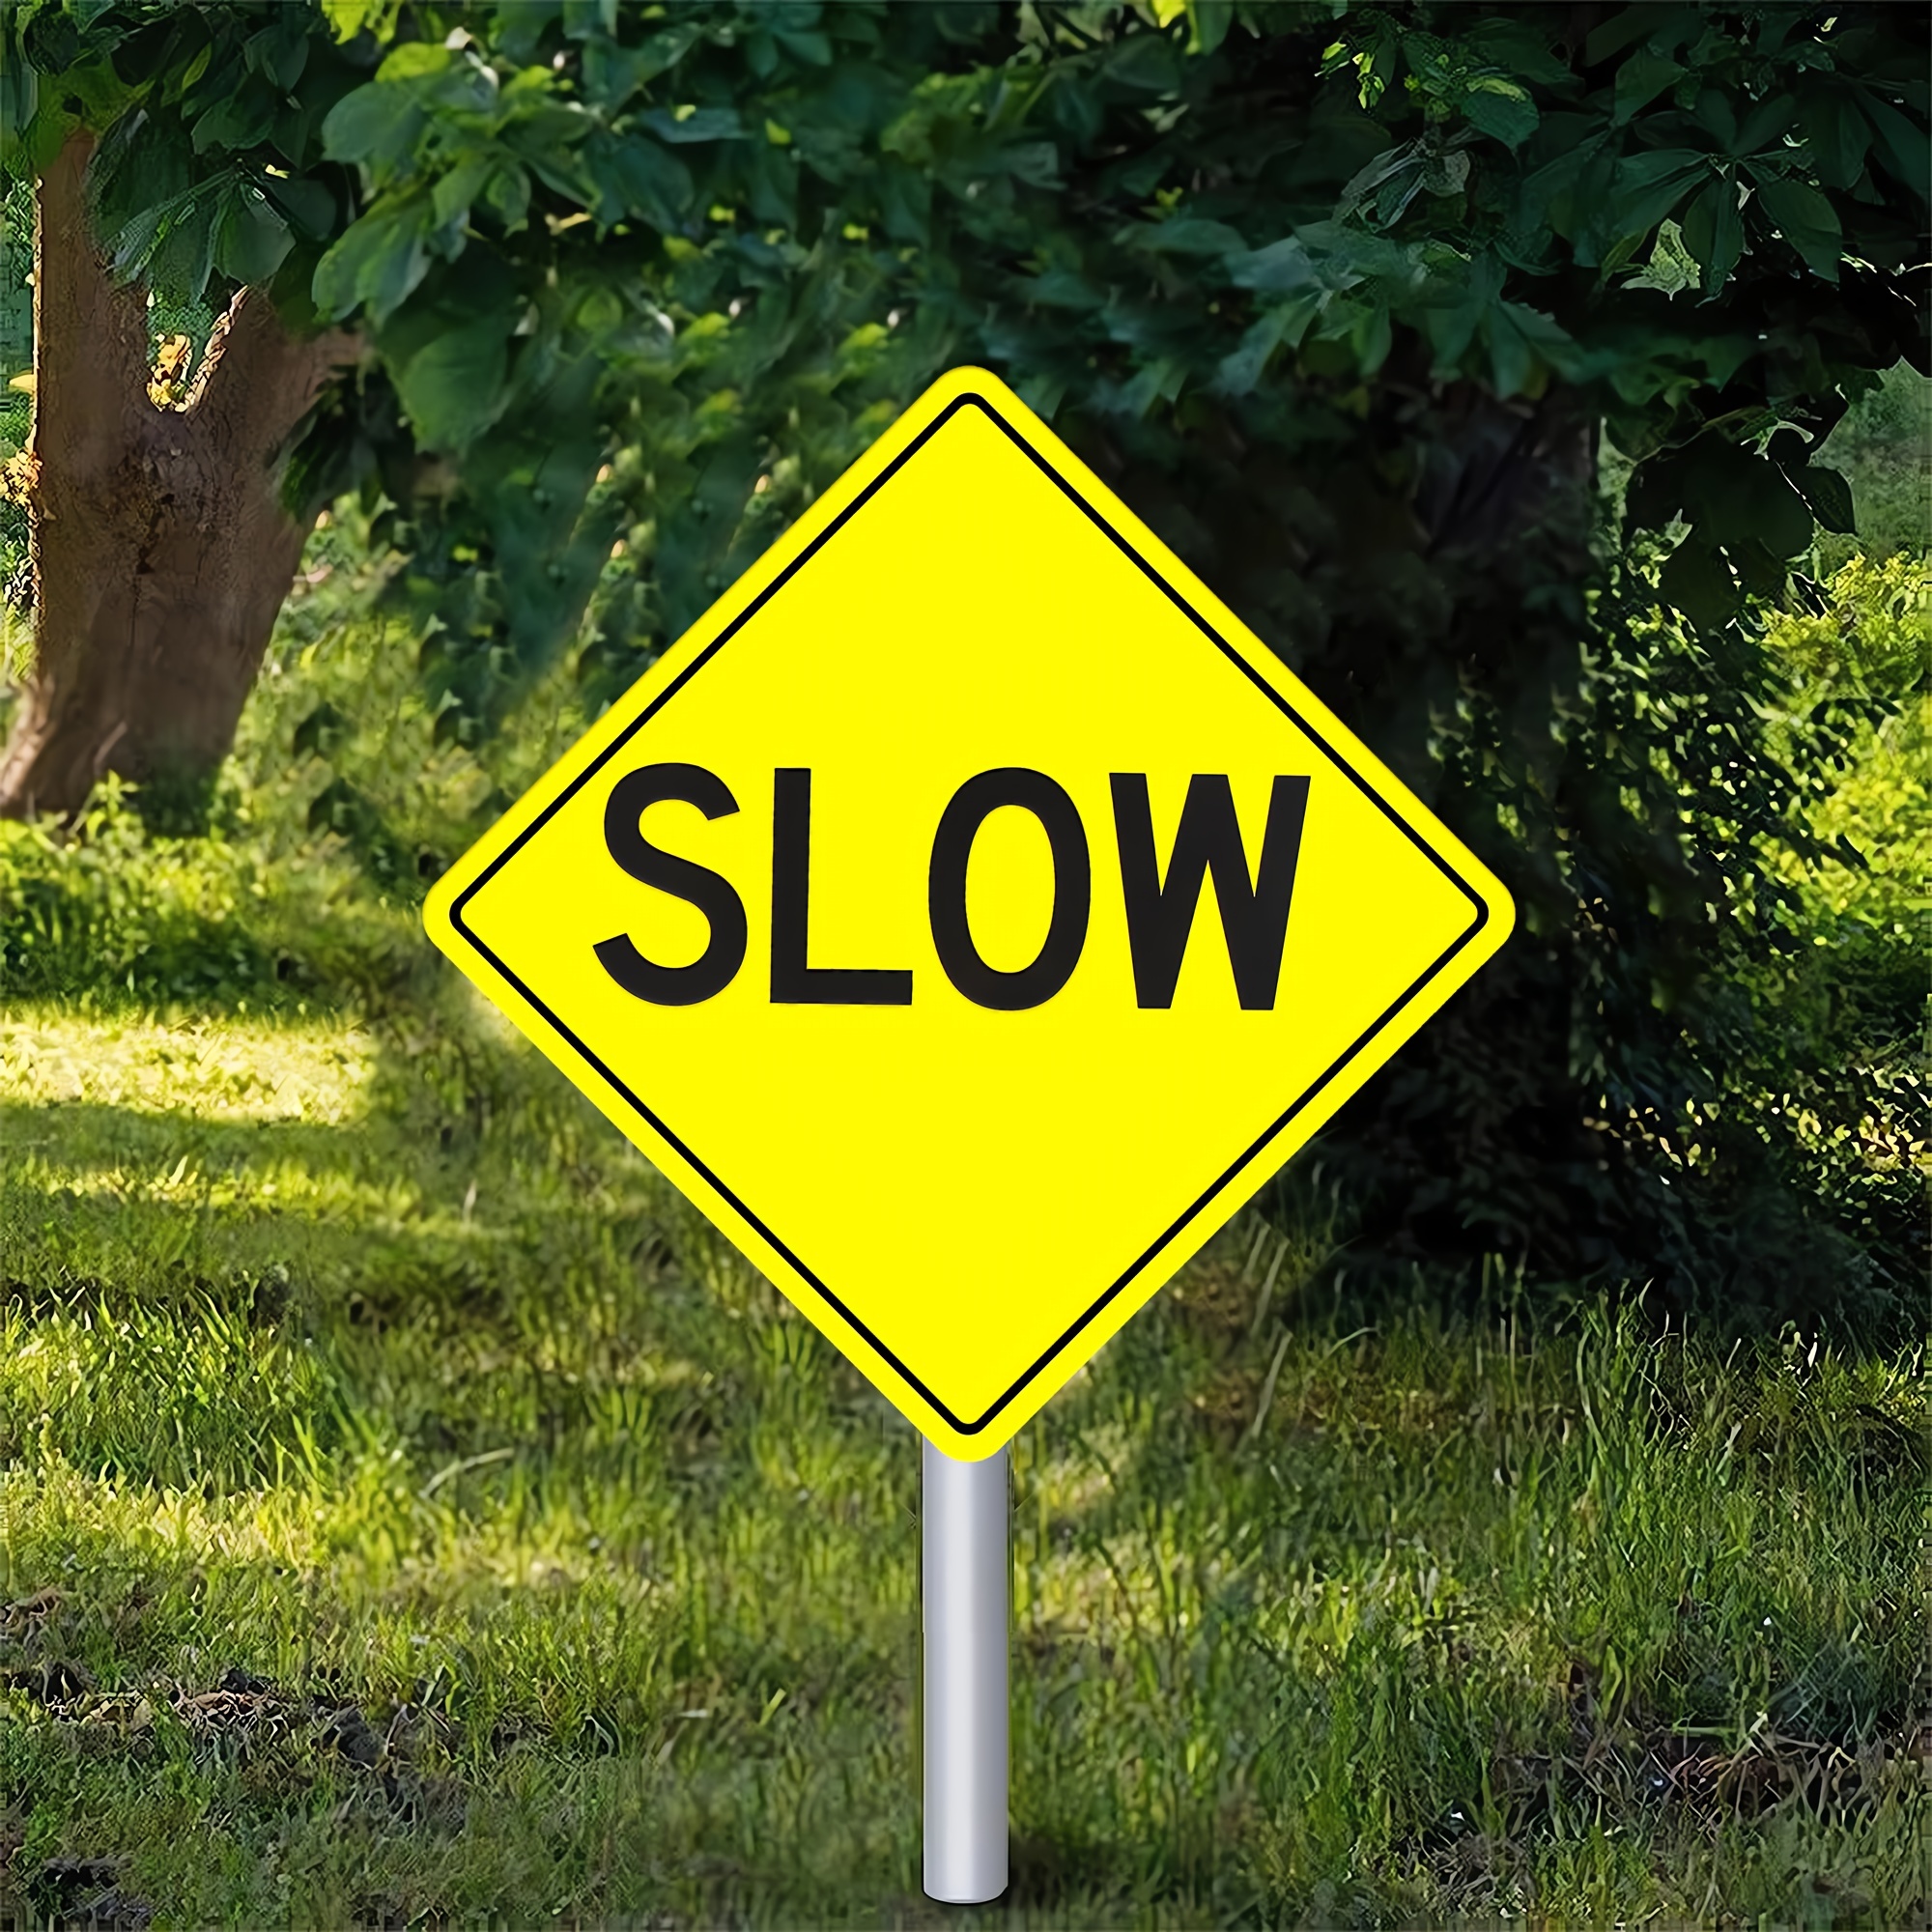 slow sign clipart